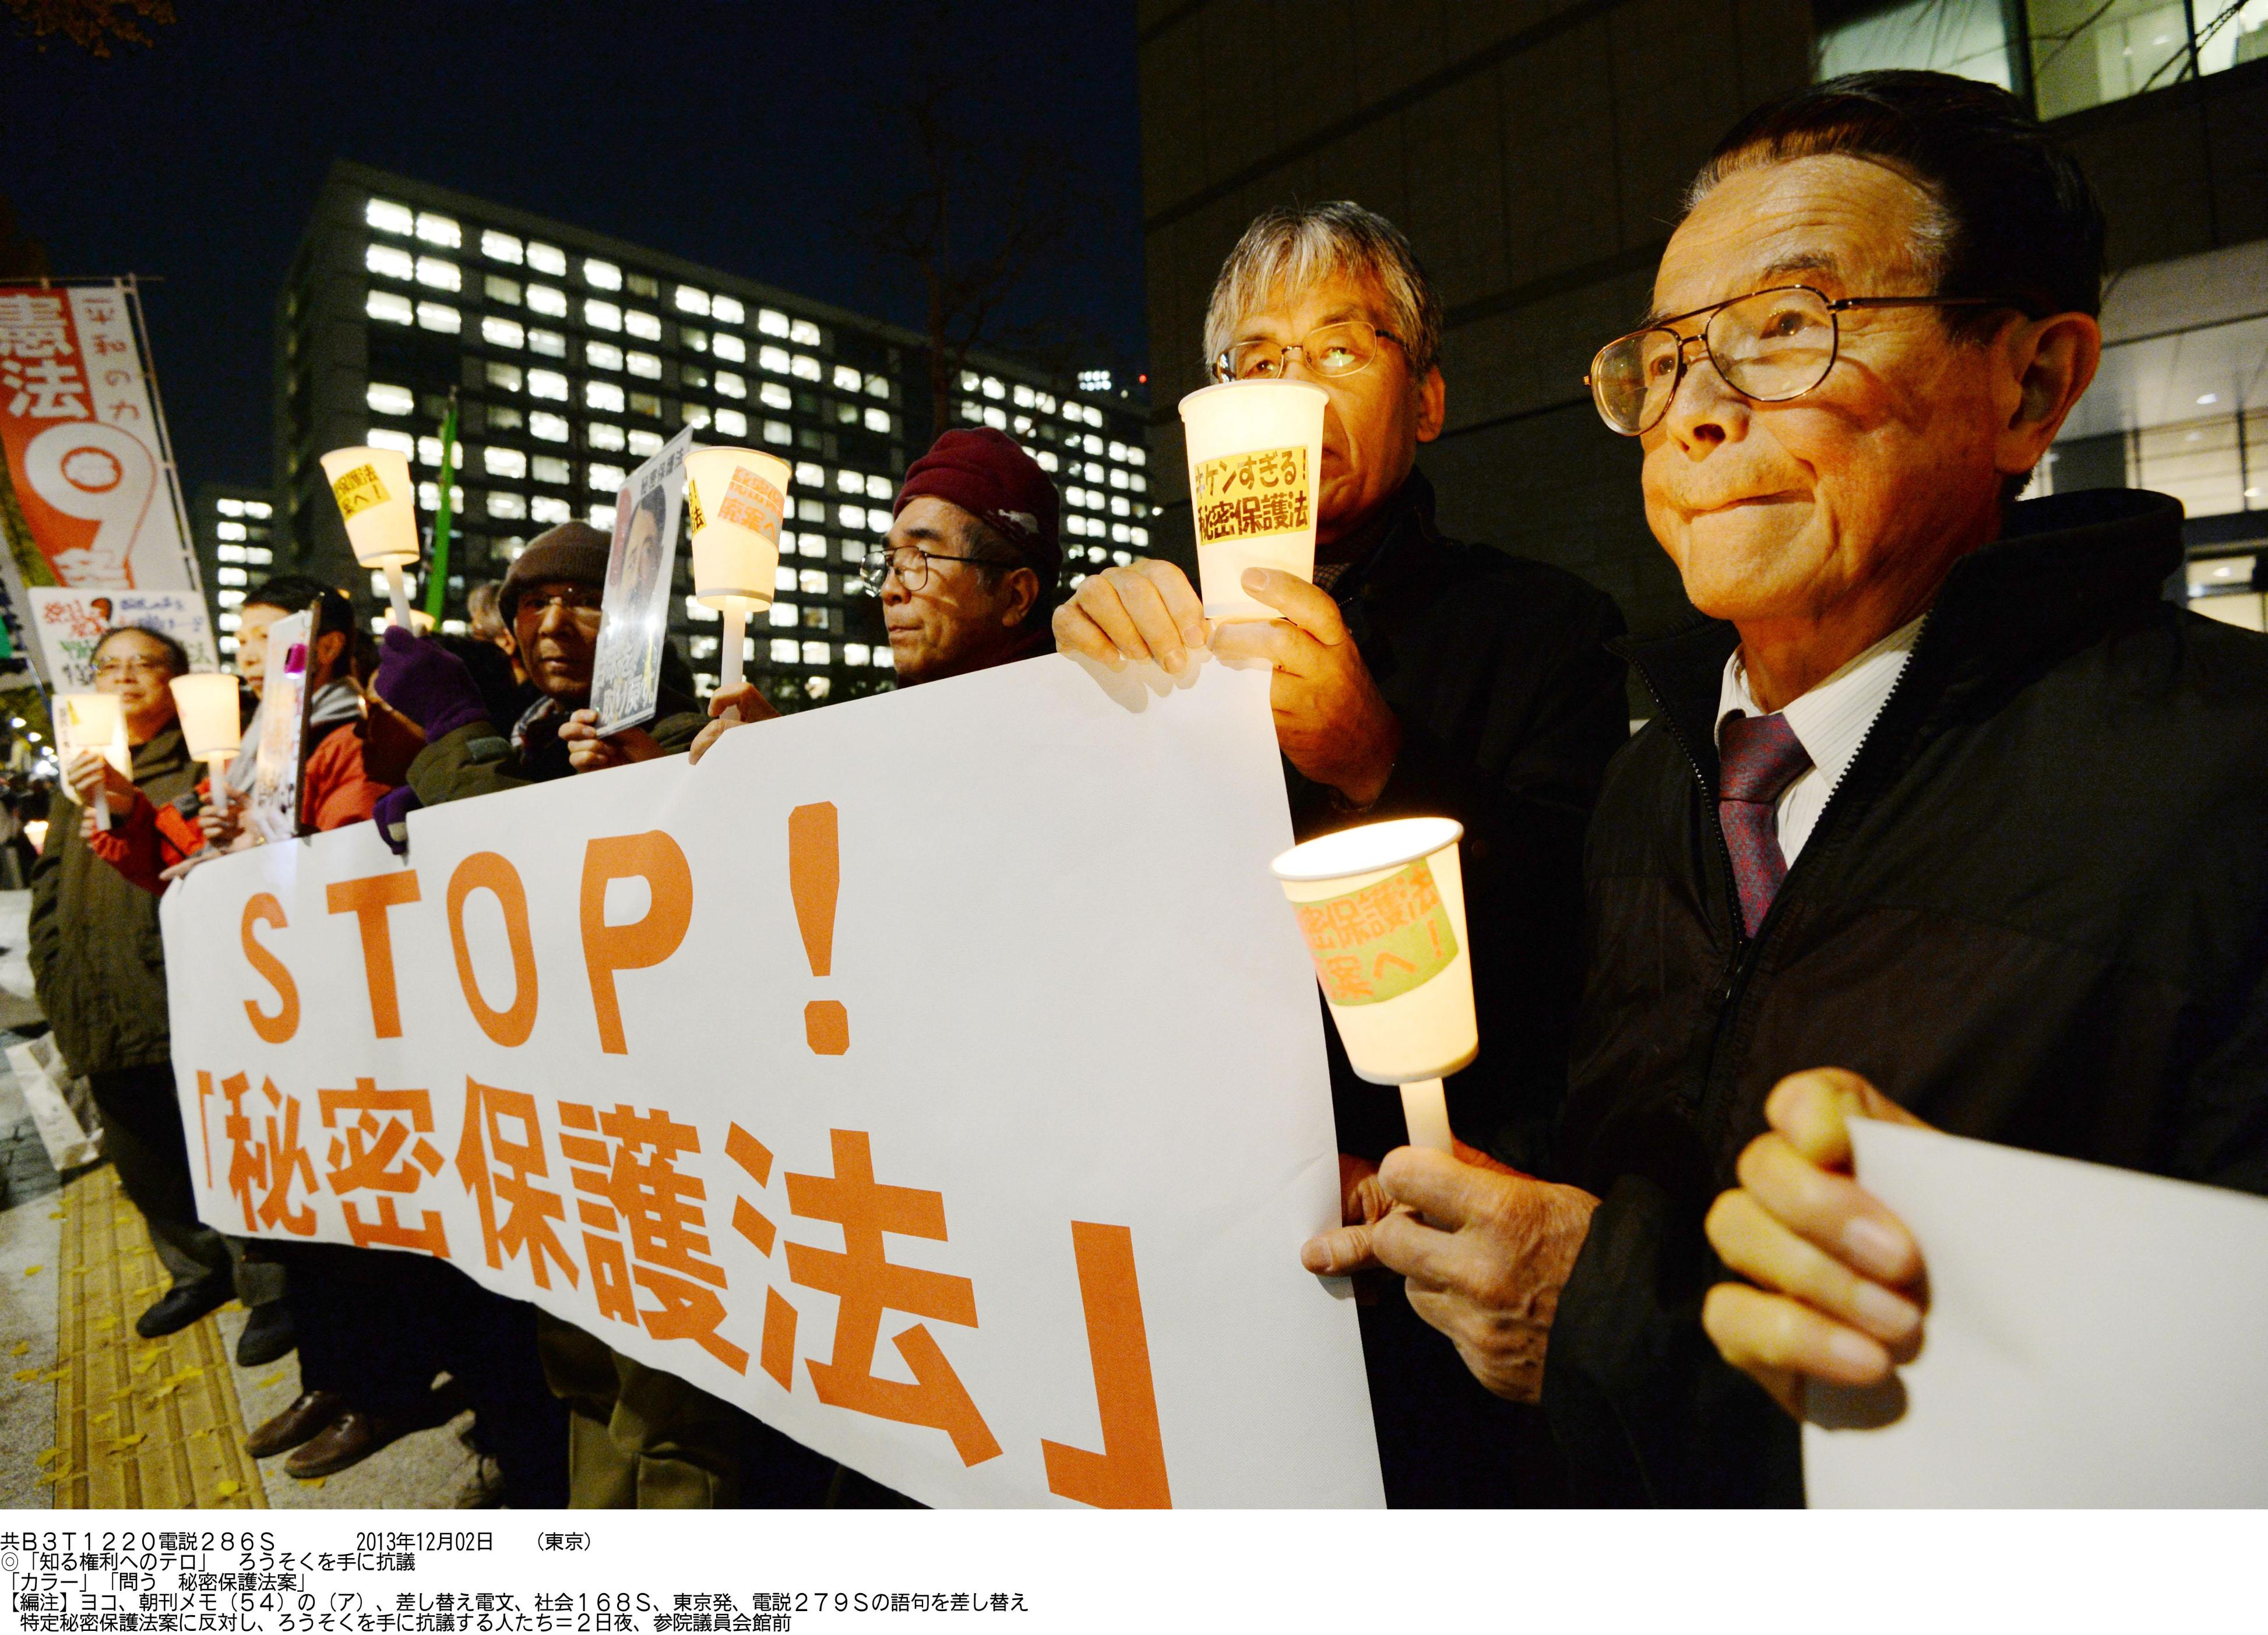 Fighting the law: Demonstrators hold candles and signs at the Diet on Monday during a protest against the state secrets bill being deliberated in the Upper House. | KYODO